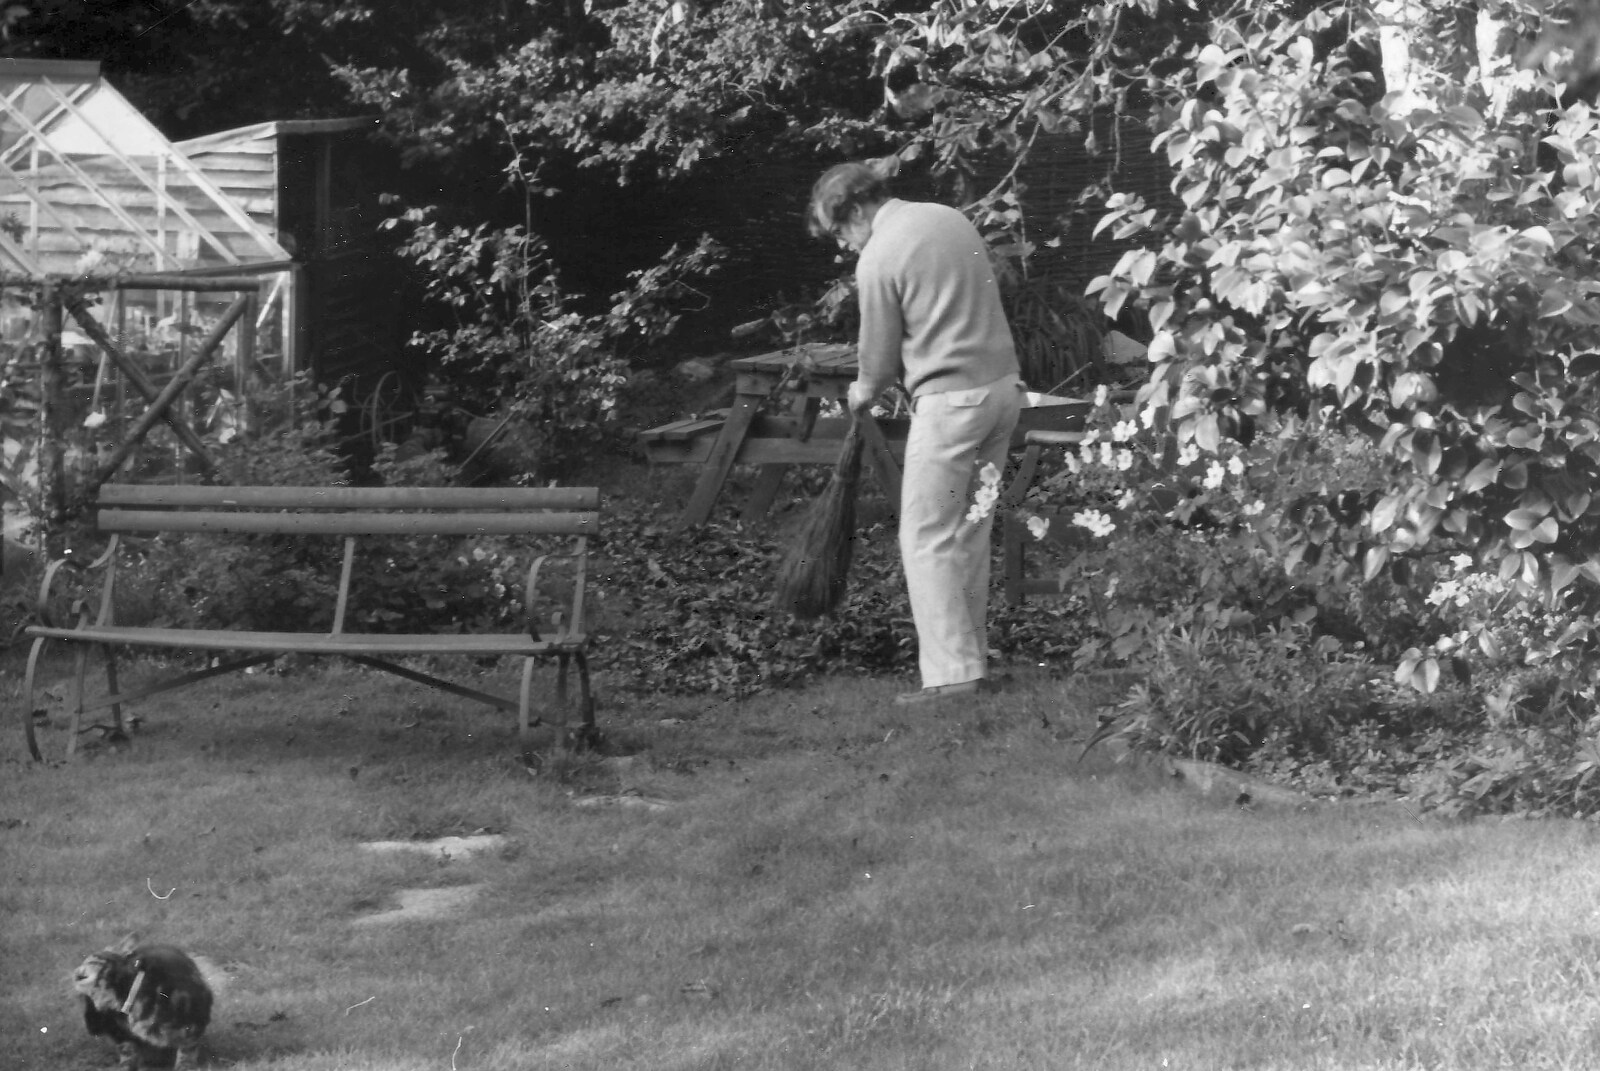 Fleabag scratches a flea as Andy sweeps from Life in Ford Cottage and Barton on Sea, Hampshire - 2nd April 1985